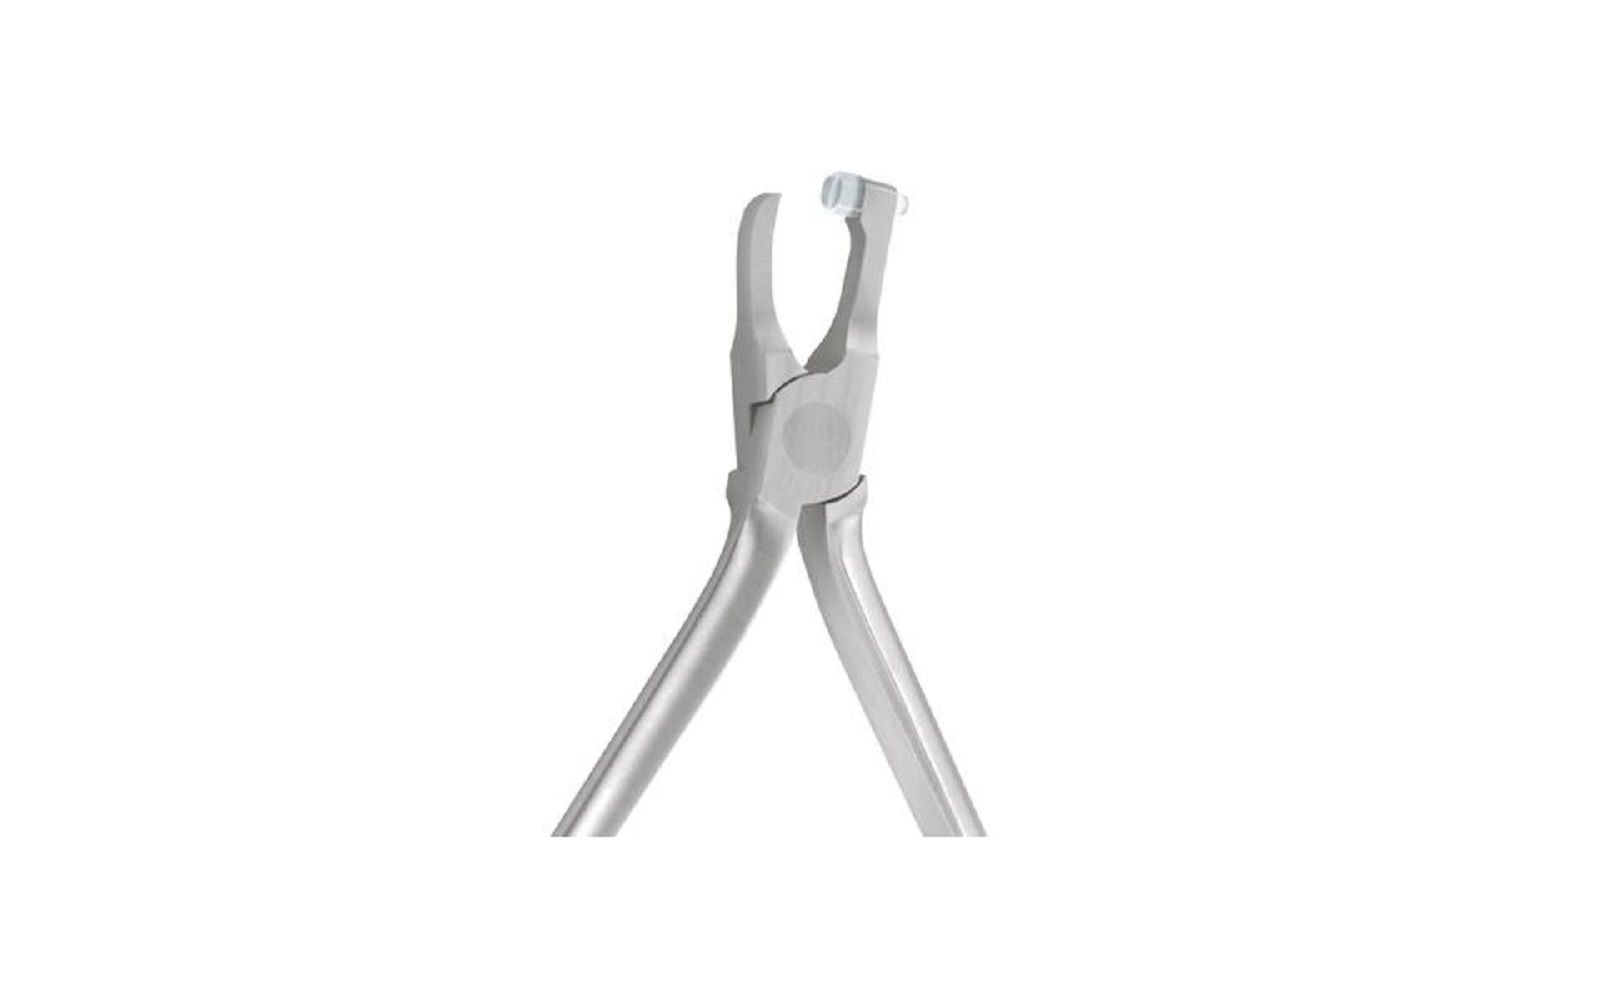 Long posterior band removing utility pliers